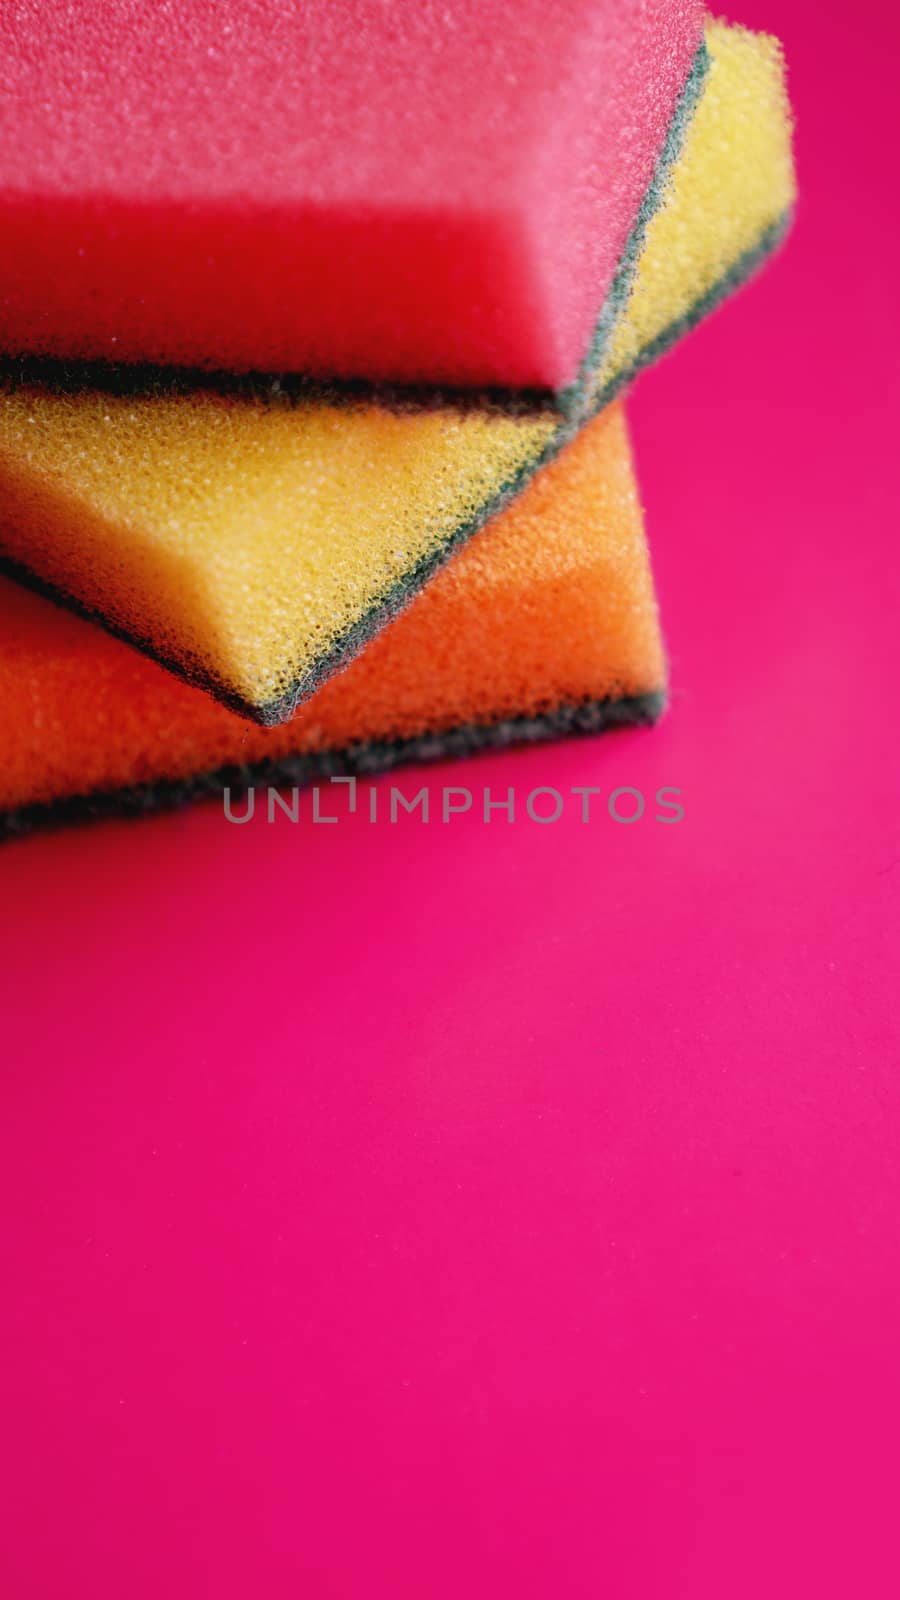 Sponges - close-up. Household cleaning concept. Colorful orange pink yellow sponges on pink background, soft focus, copy text.